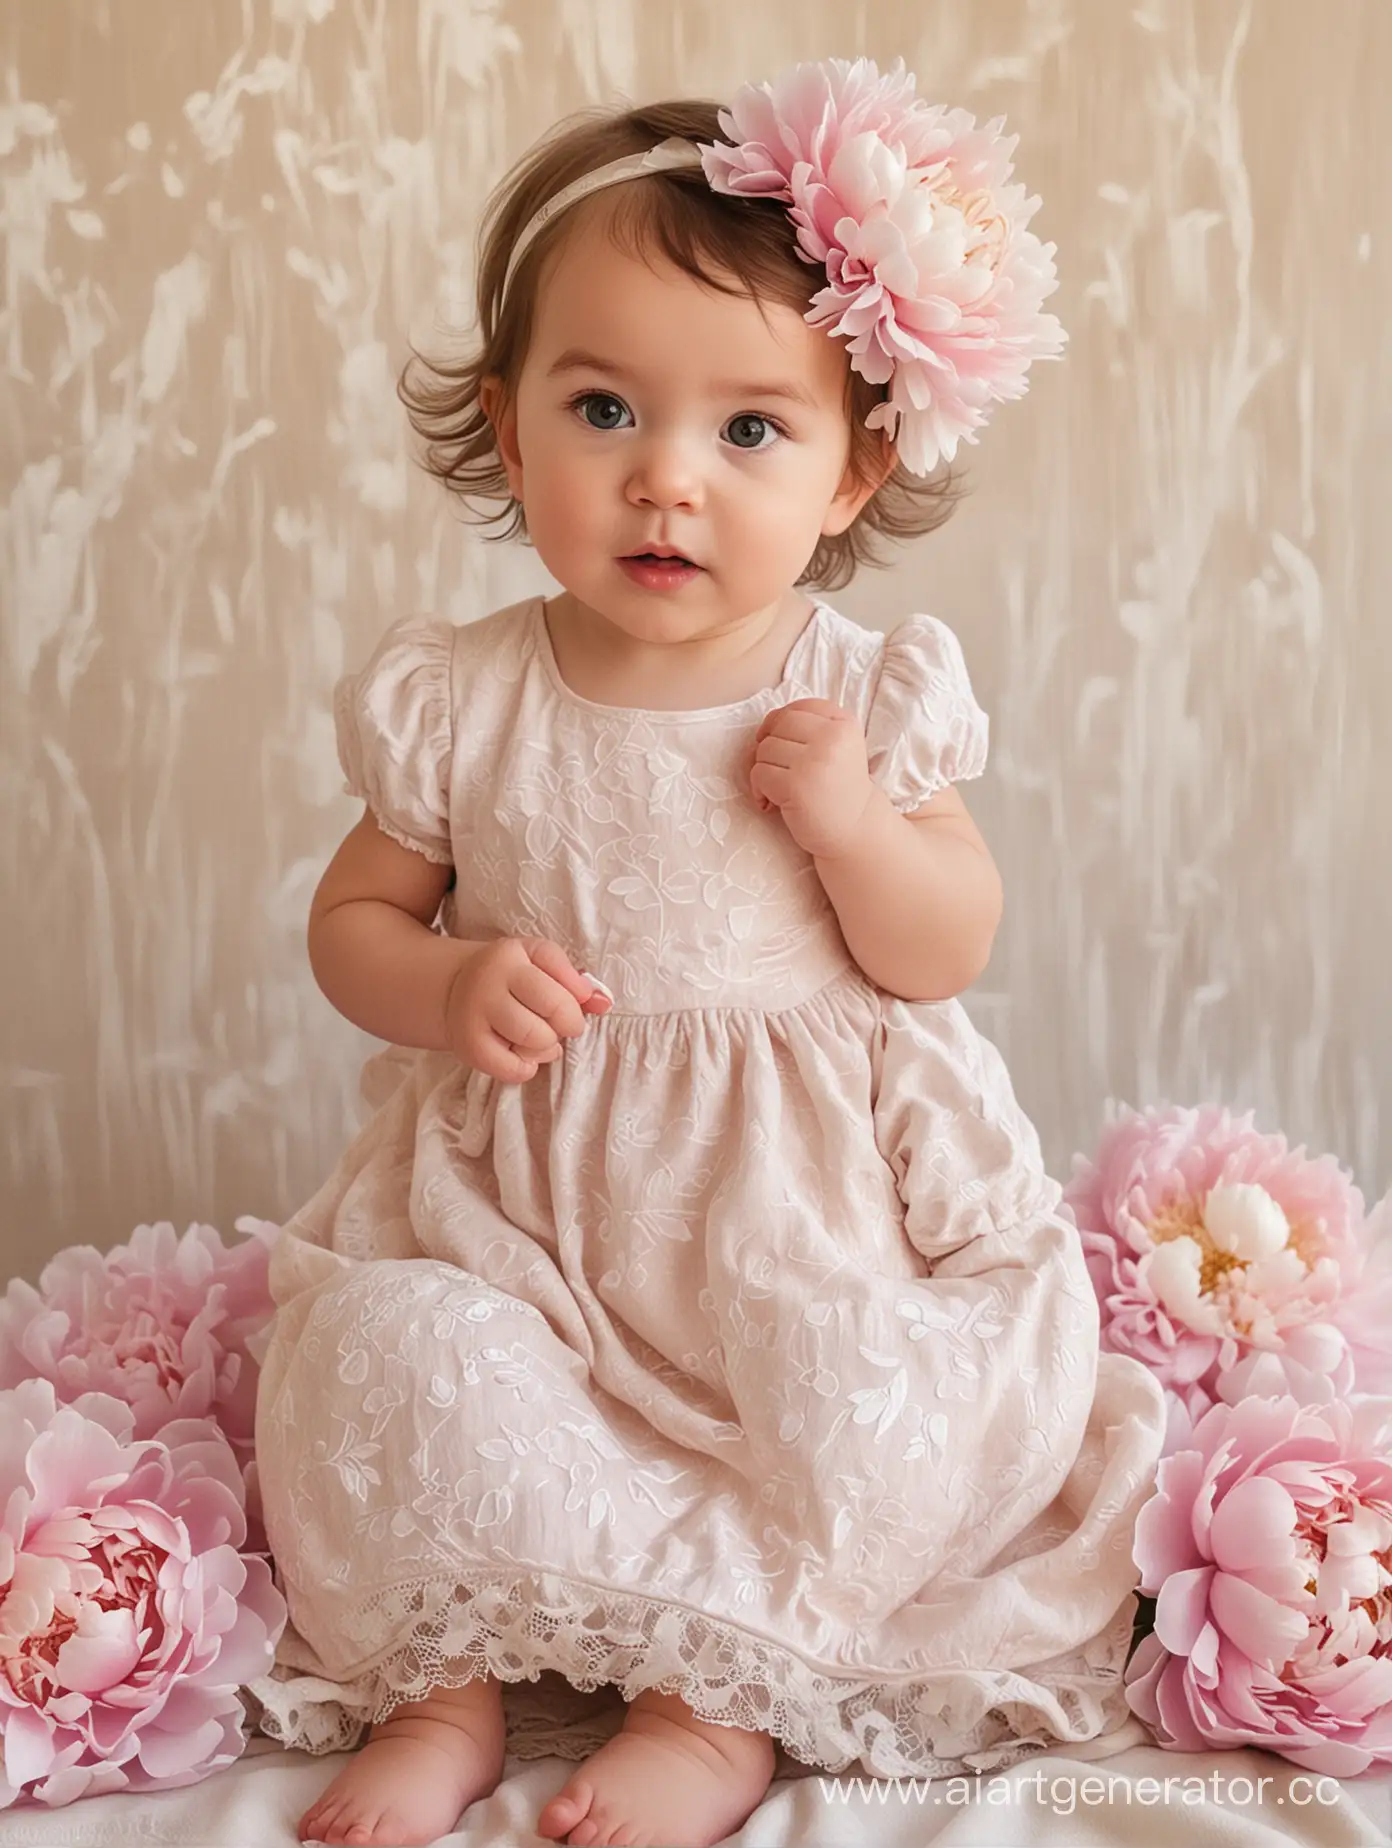 Adorable-OneYearOld-Girl-in-Fluffy-Pink-Lace-Dress-with-Peony-Floral-Background